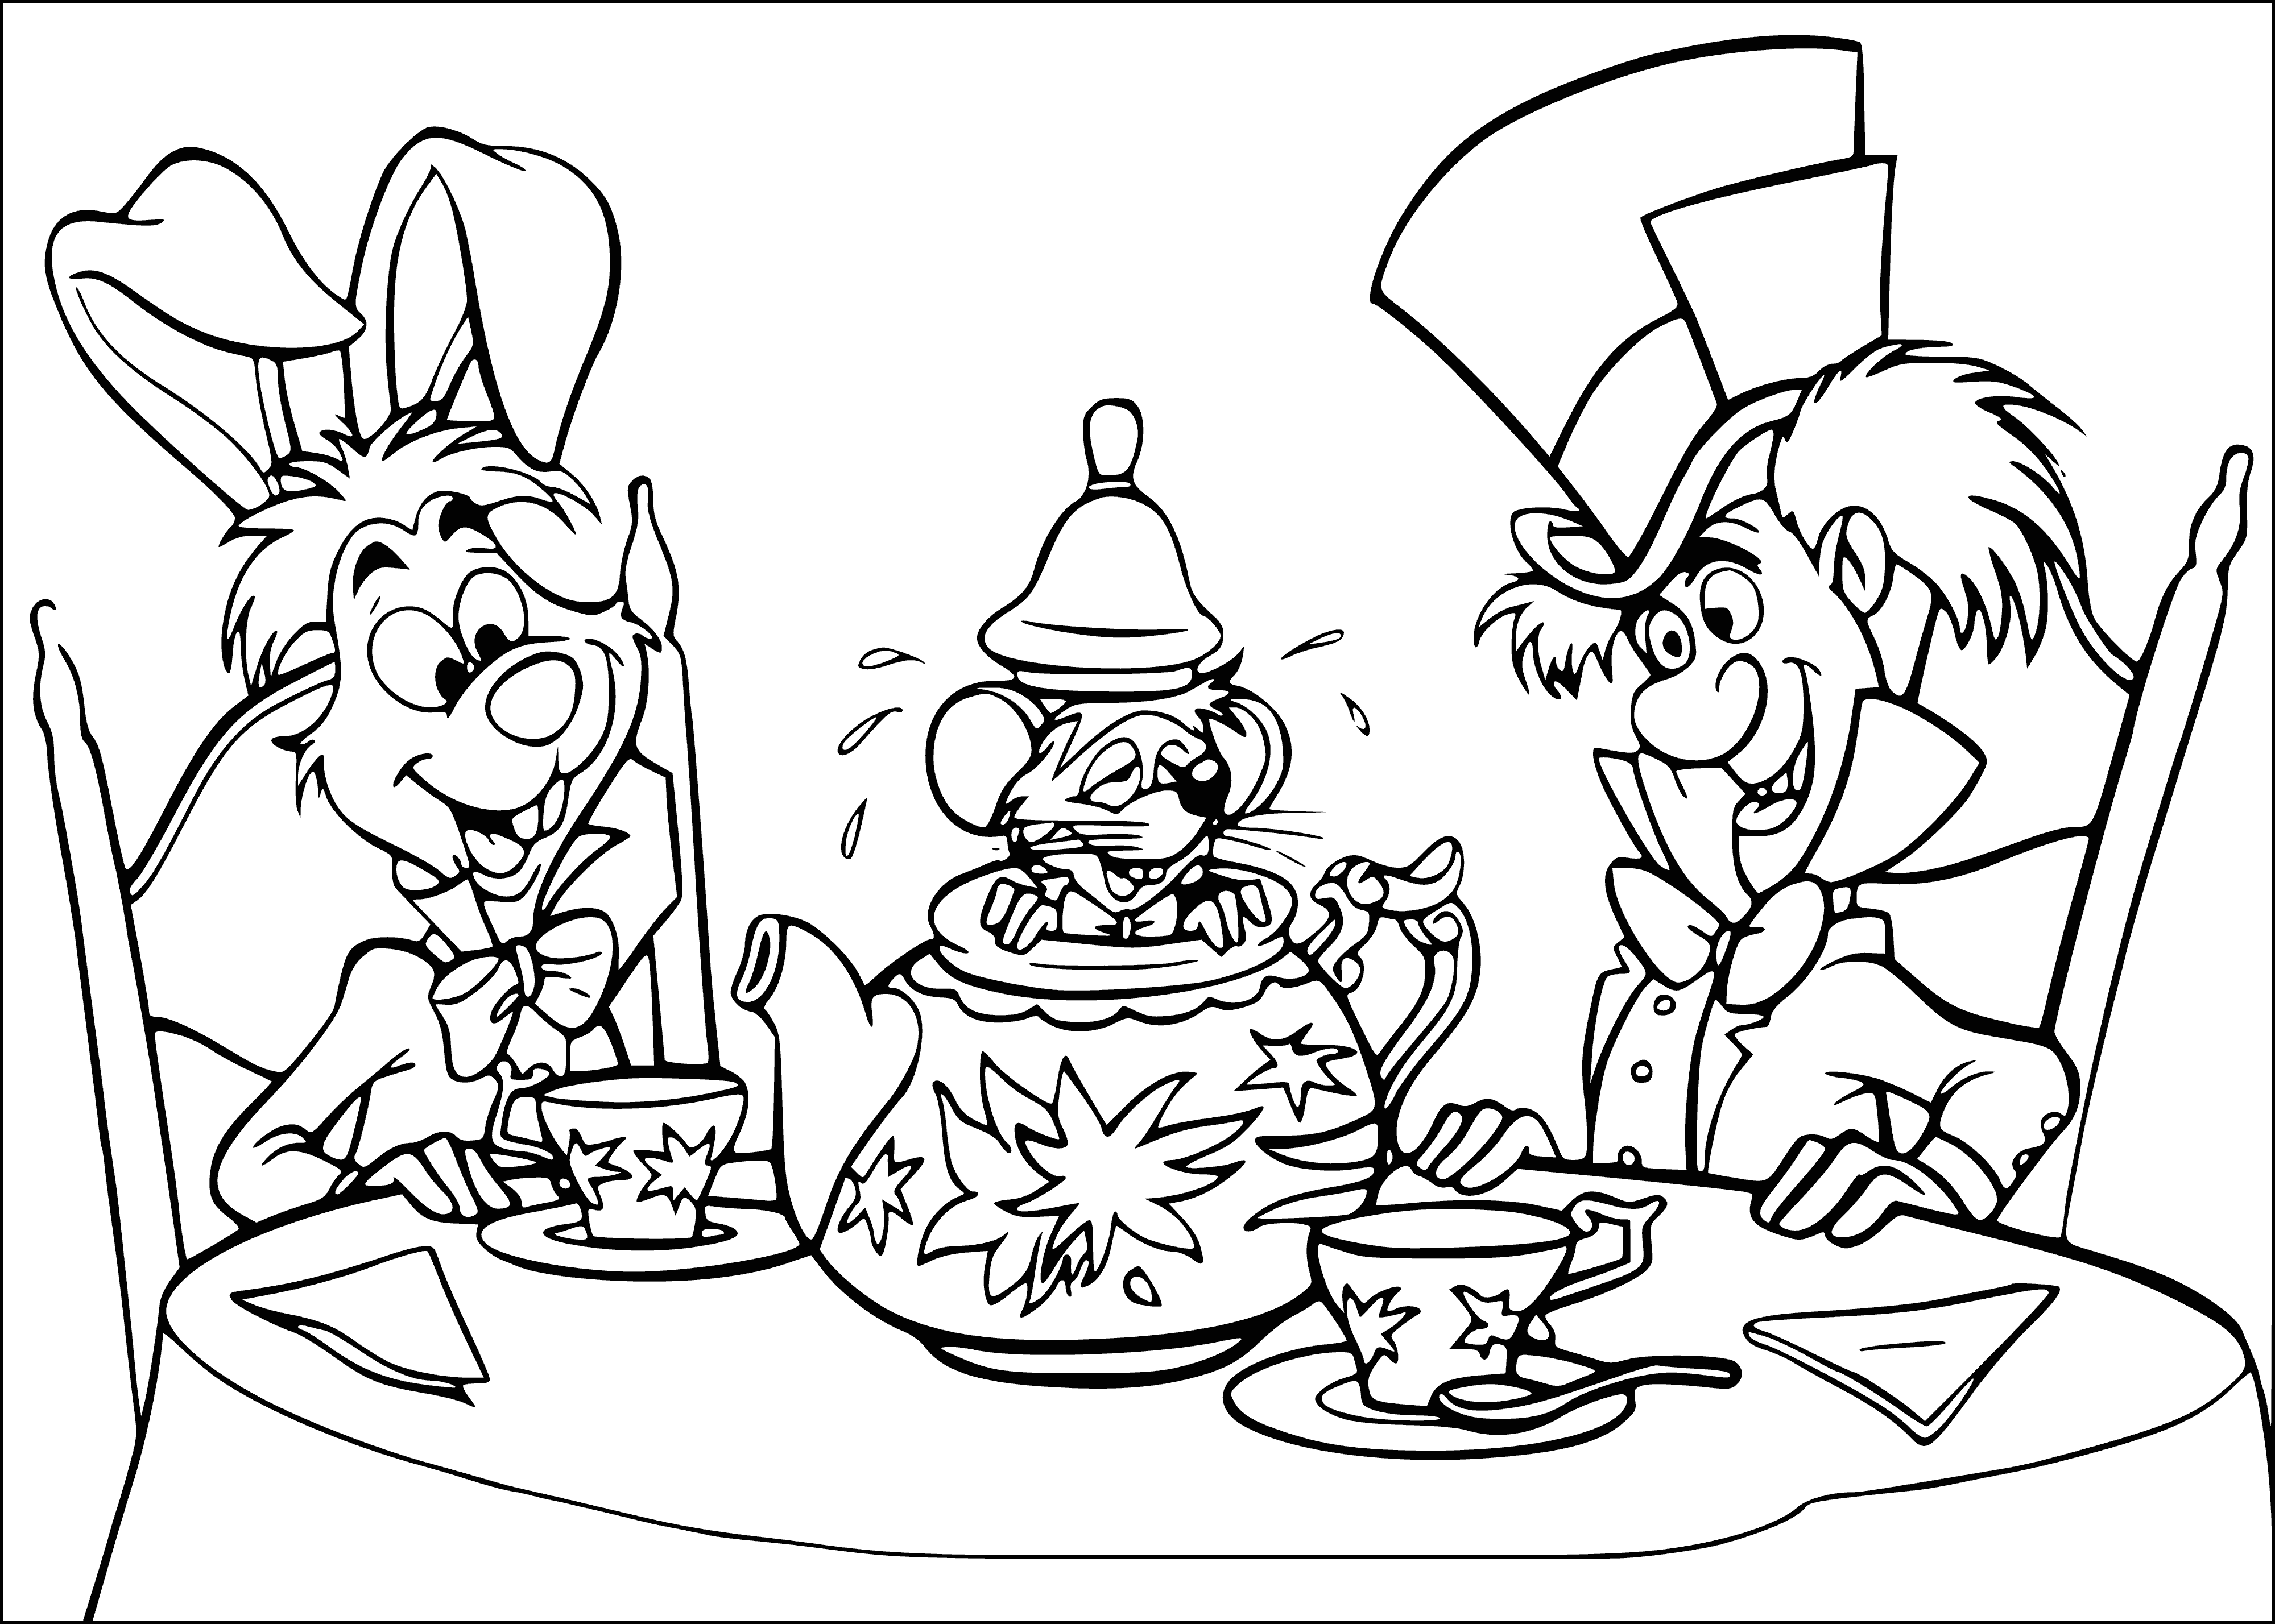 coloring page: A large rabbit sits startled & worried at a table with a teapot & 2 cups, wearing a blue bowtie & coat, large watch on paw & long whiskers.